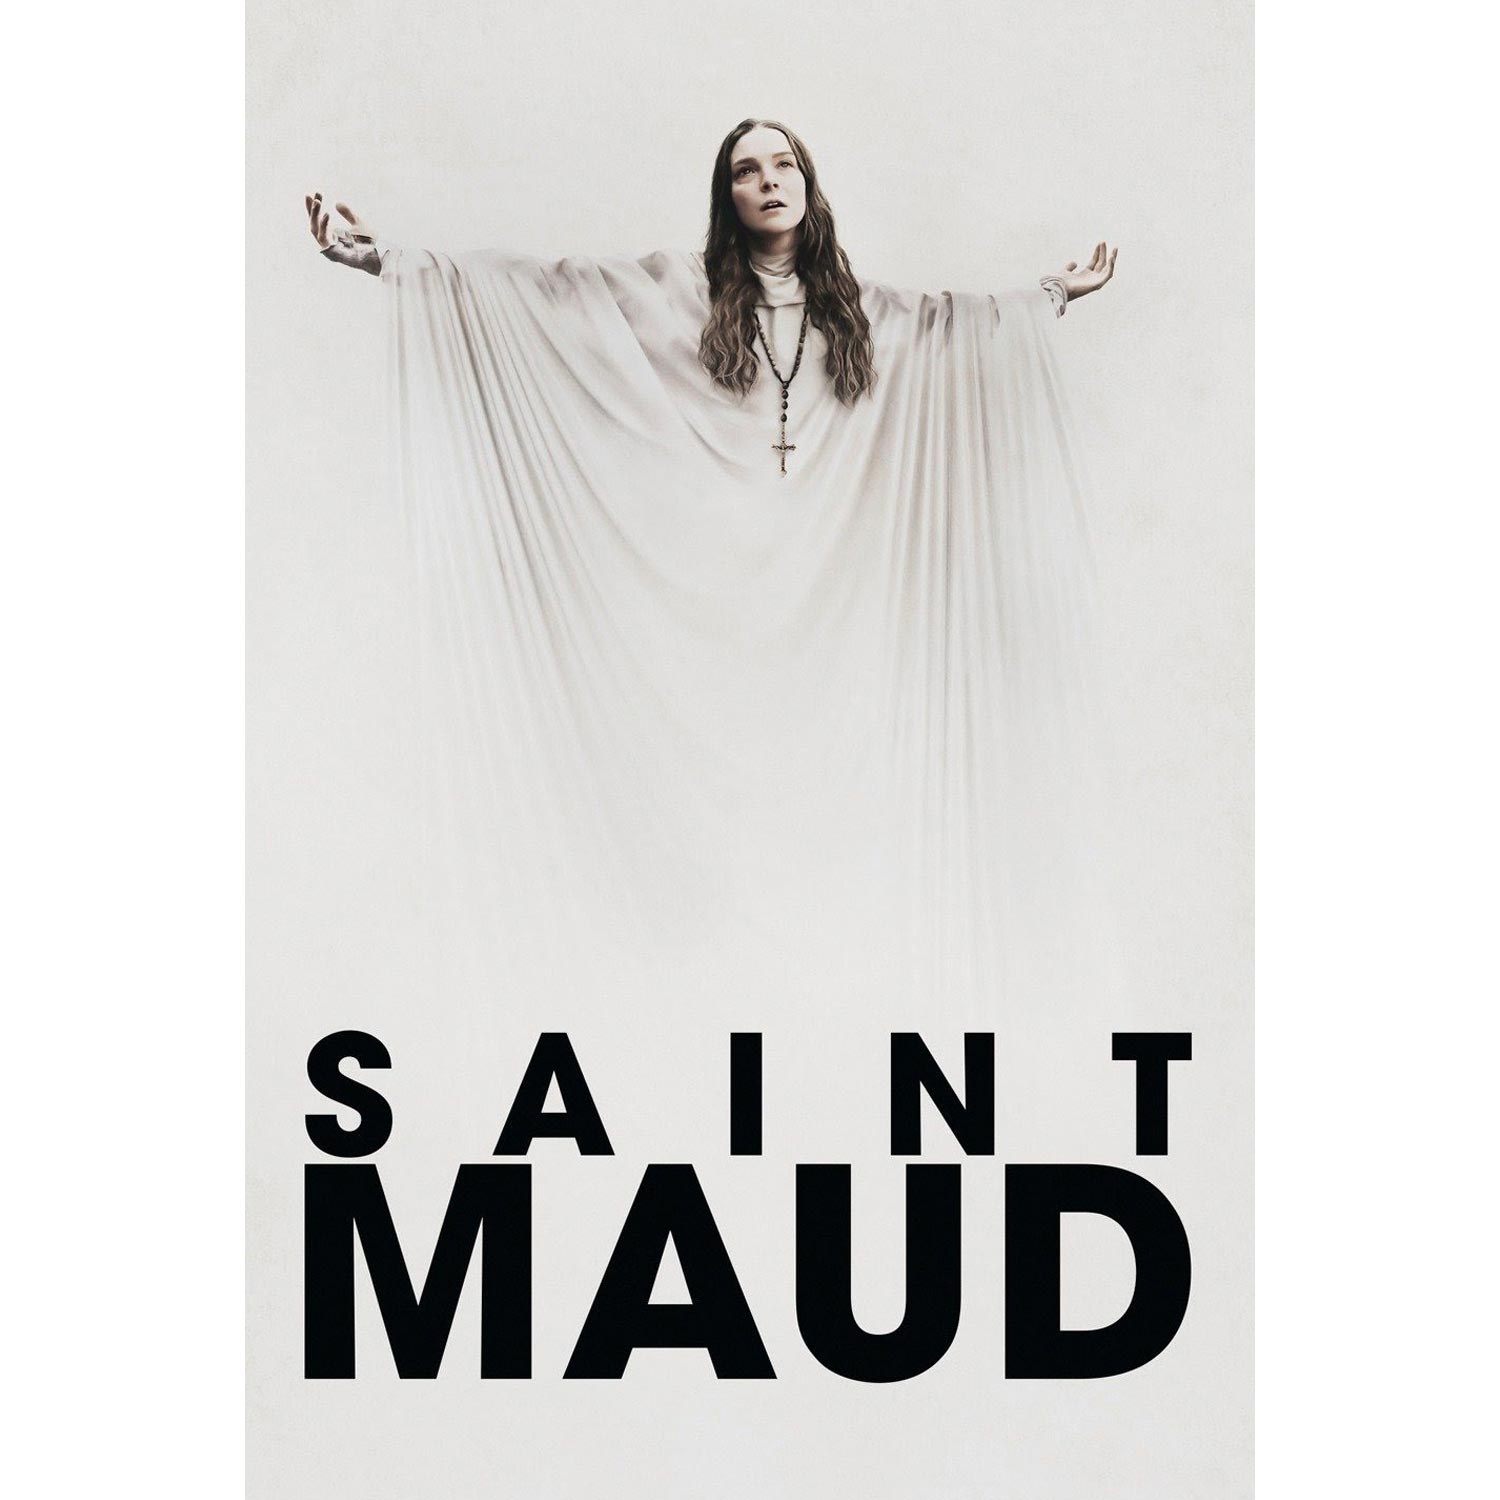 The poster for Saint Maud.